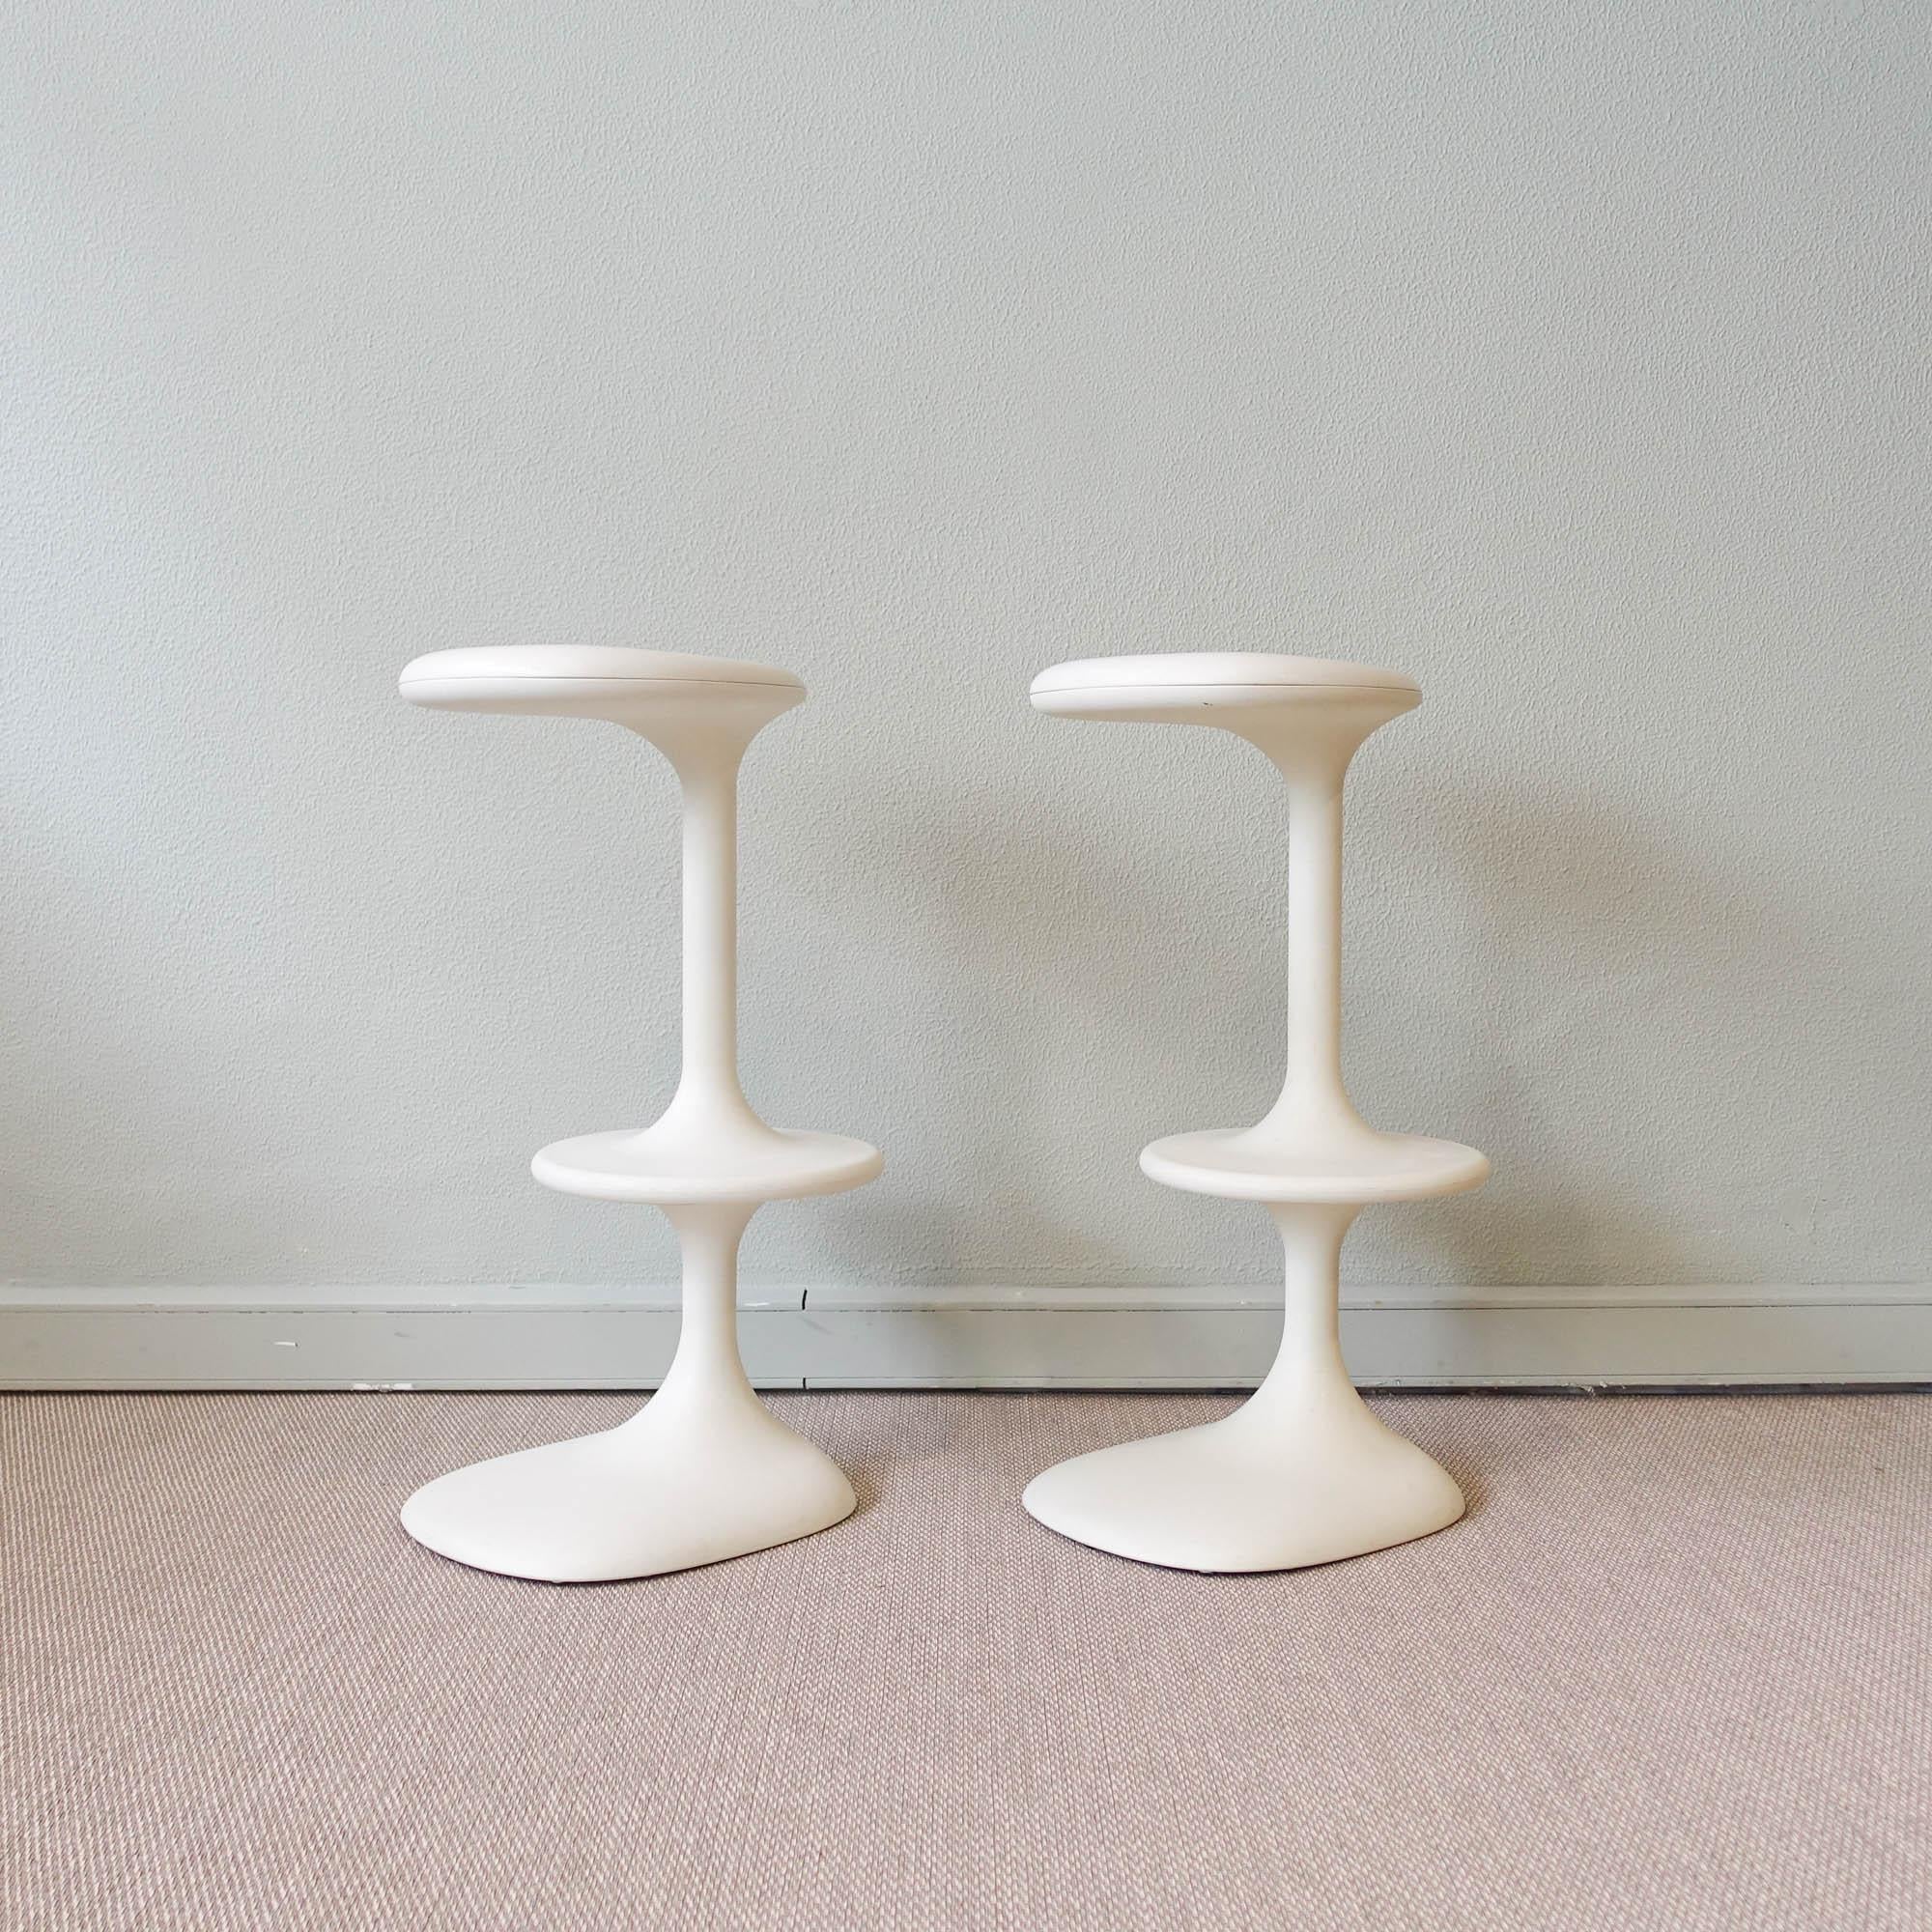 This pair of stools, named Kant, were designed by Karim Rashid and produced by Casamania Italy. The name Kant stands for the philosophy by Immanuel Kant. Nature and Art show blurred boundaries.
The organic shaped stools were made of light brown